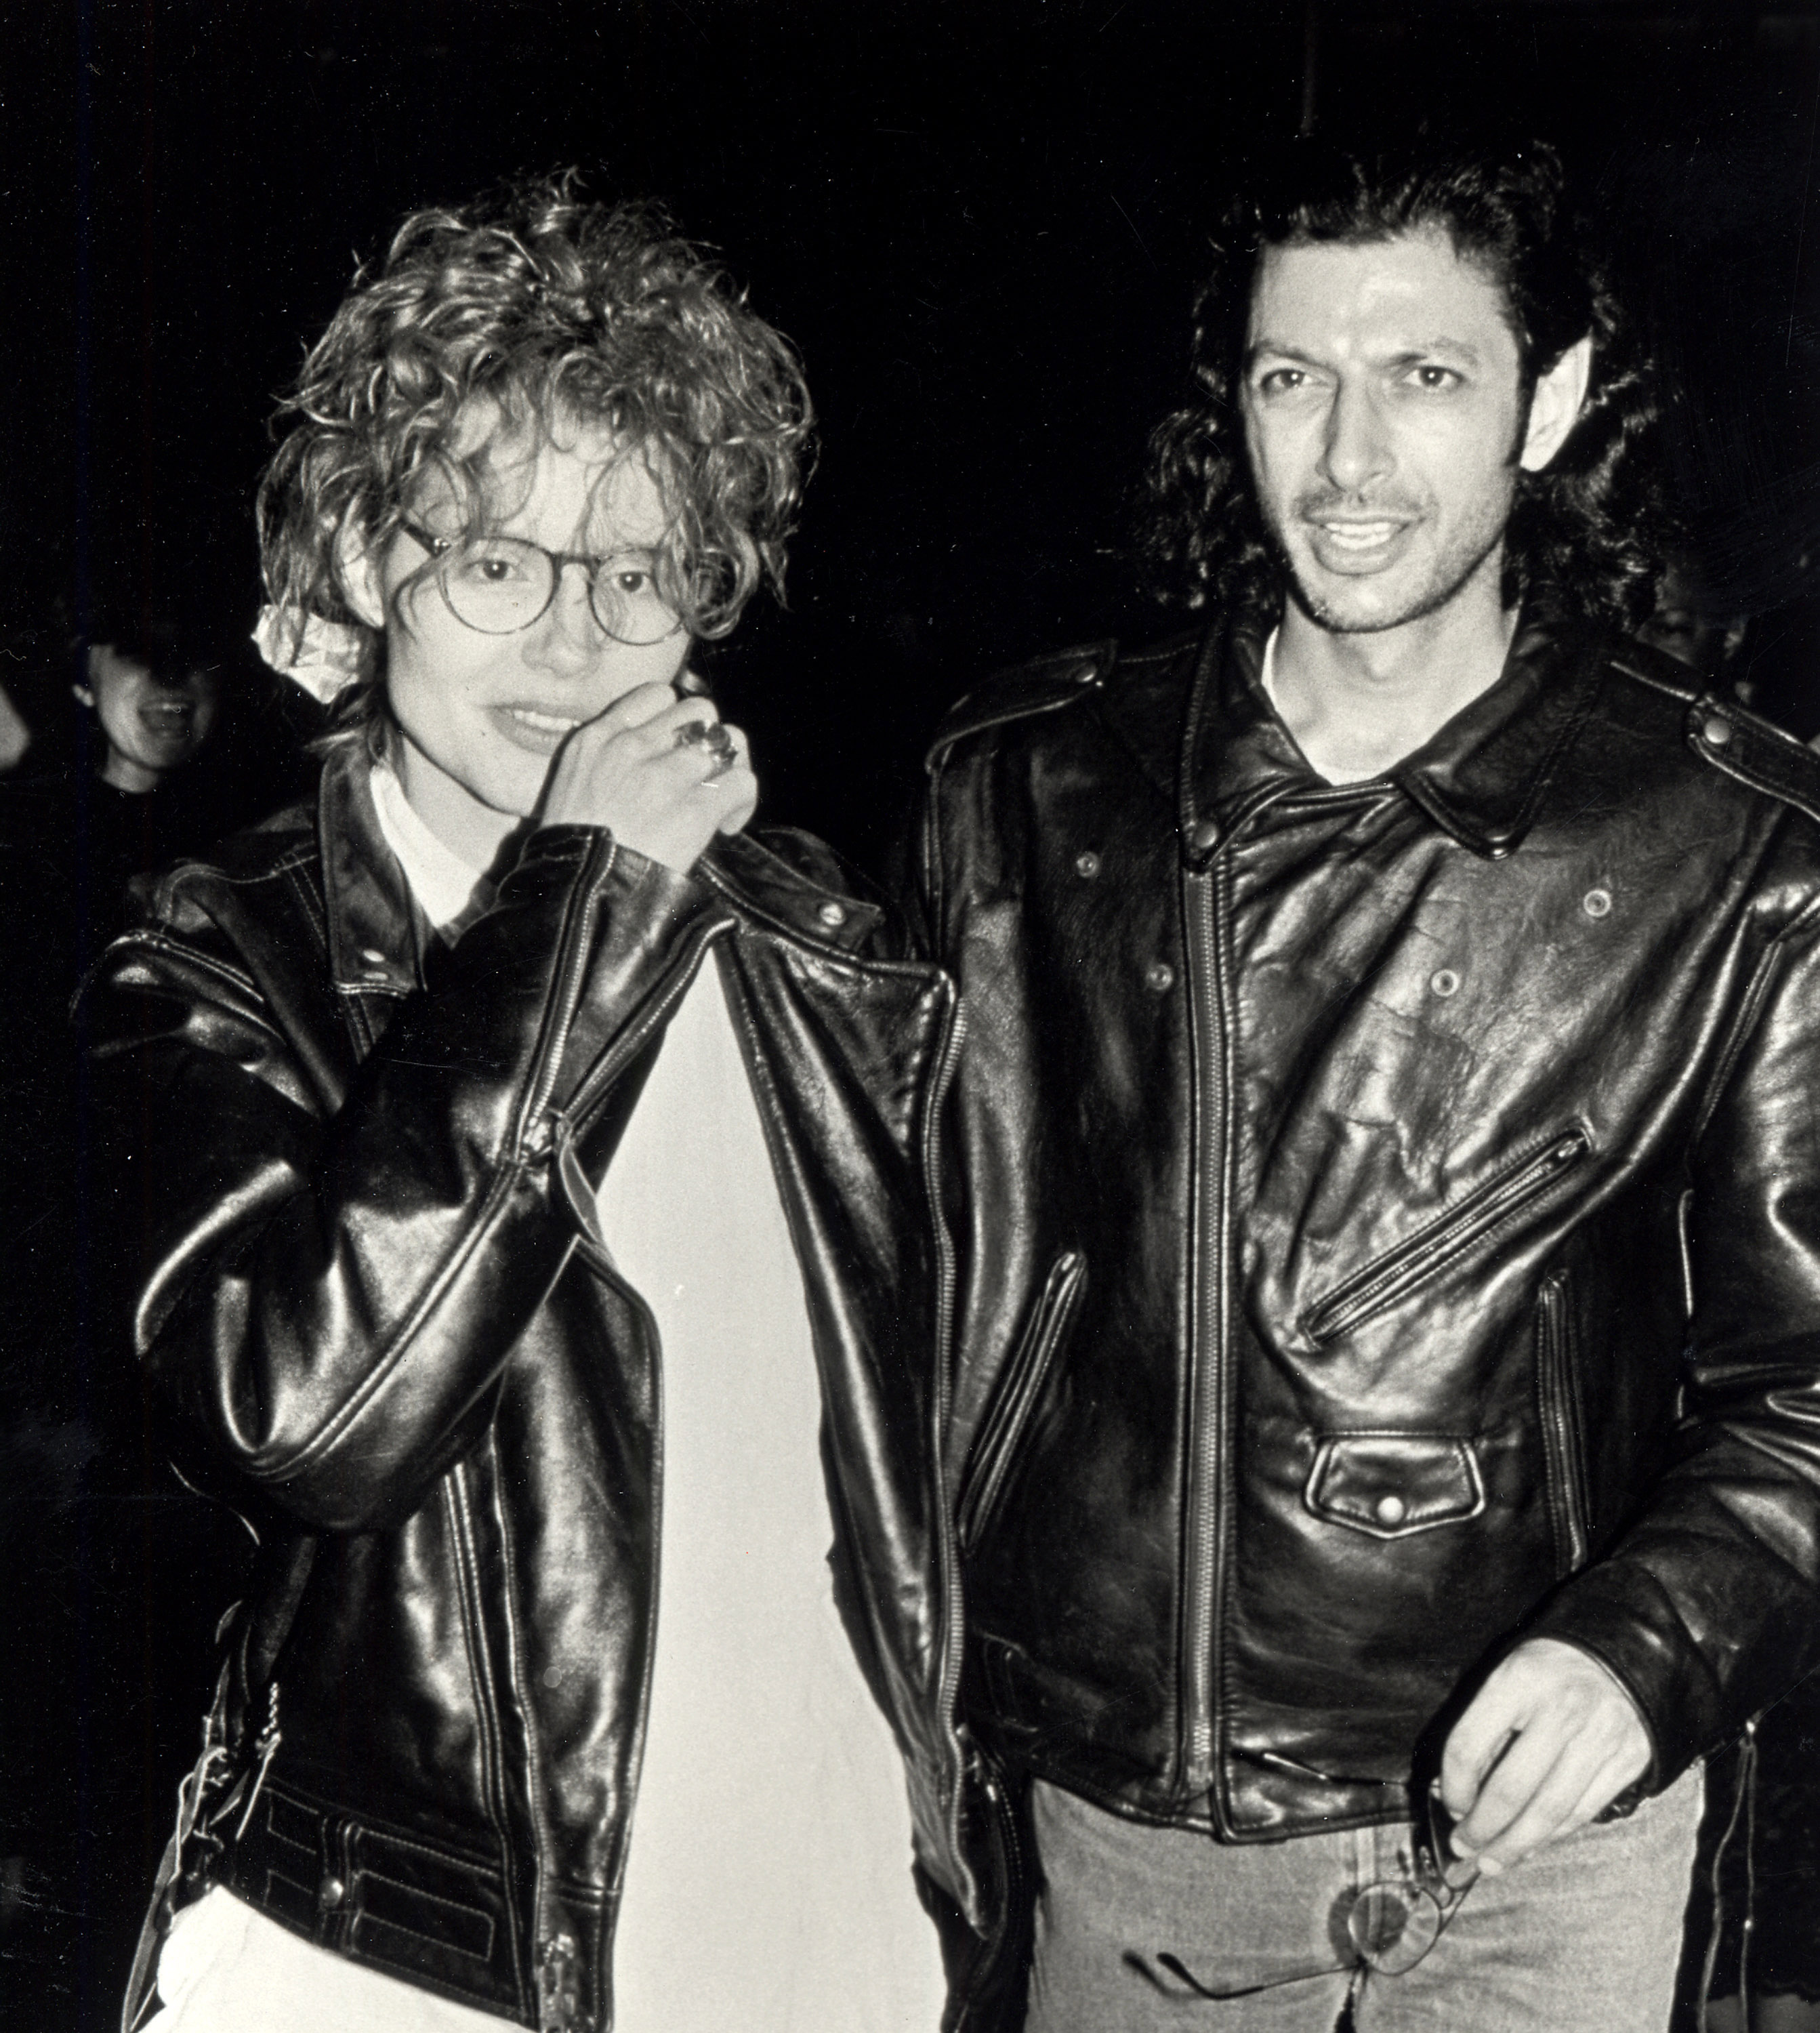 Geena Davis and Jeff Goldblum at Dionne Warwick's 2nd Annual AIDS Benefit in New York City, 1989 | Source: Getty Images